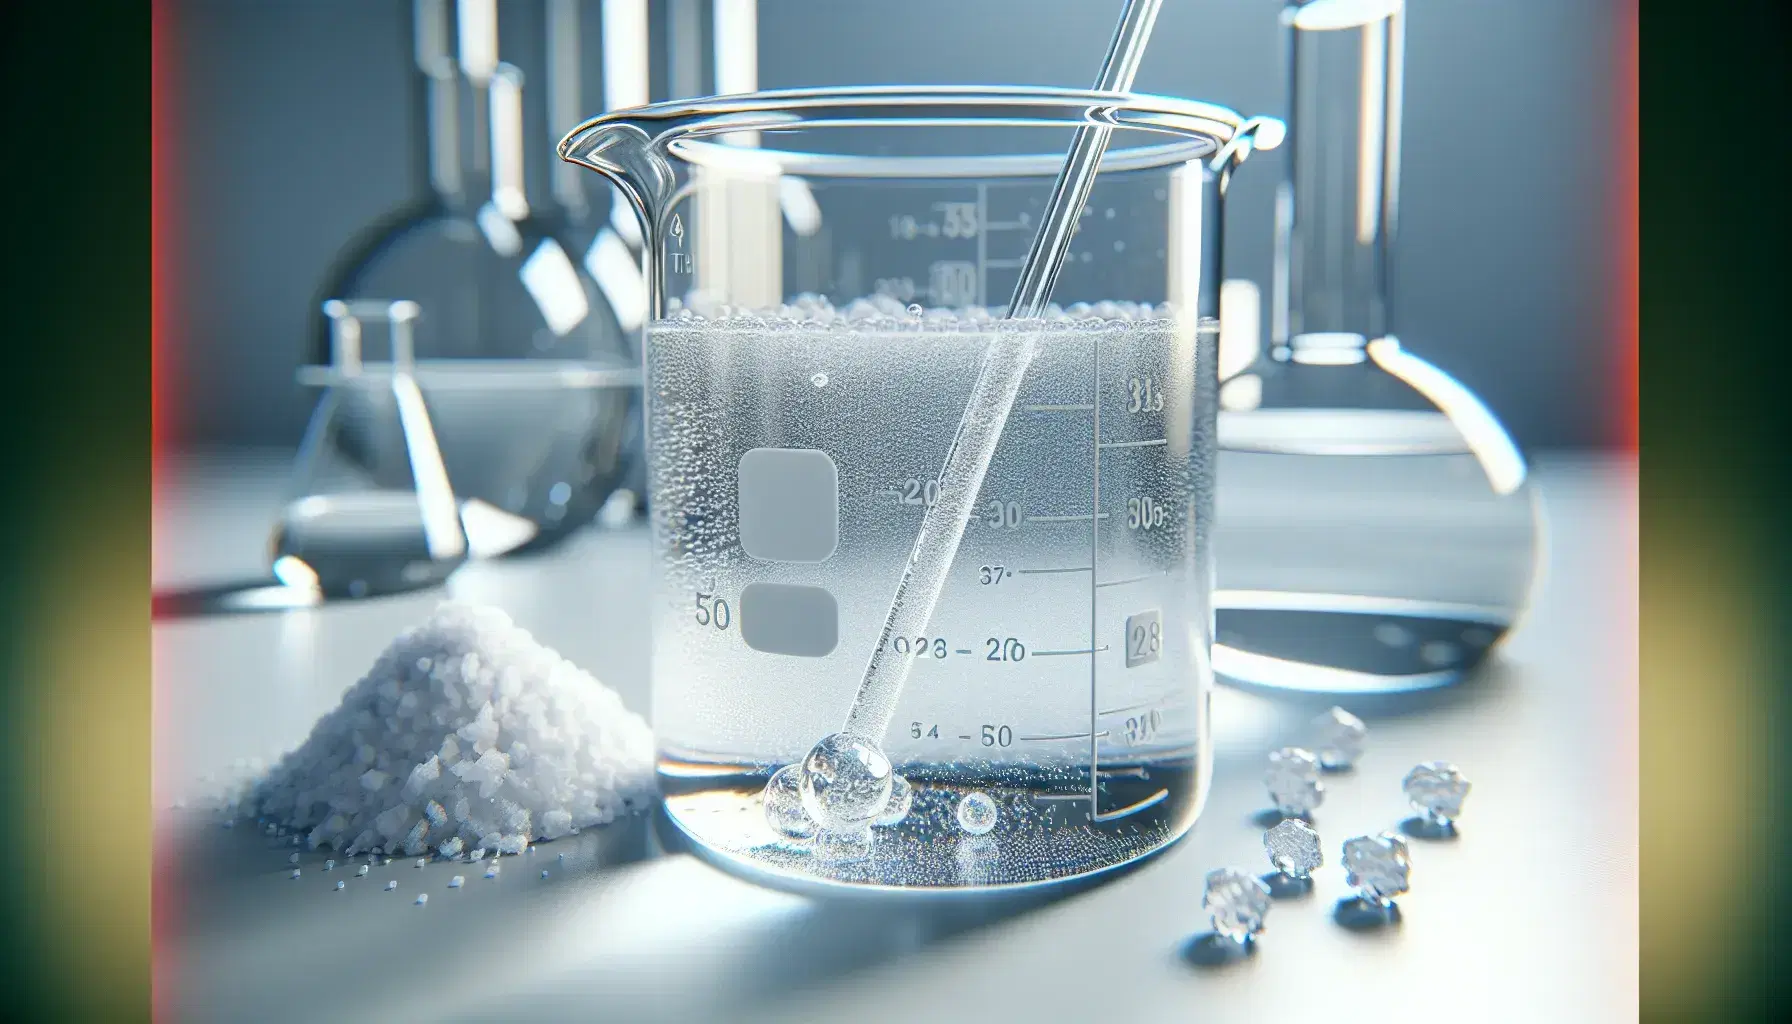 Transparent glass beaker with colorless liquid and bubbles, next to white crystals on white surface, stirring rod and blurred laboratory background.